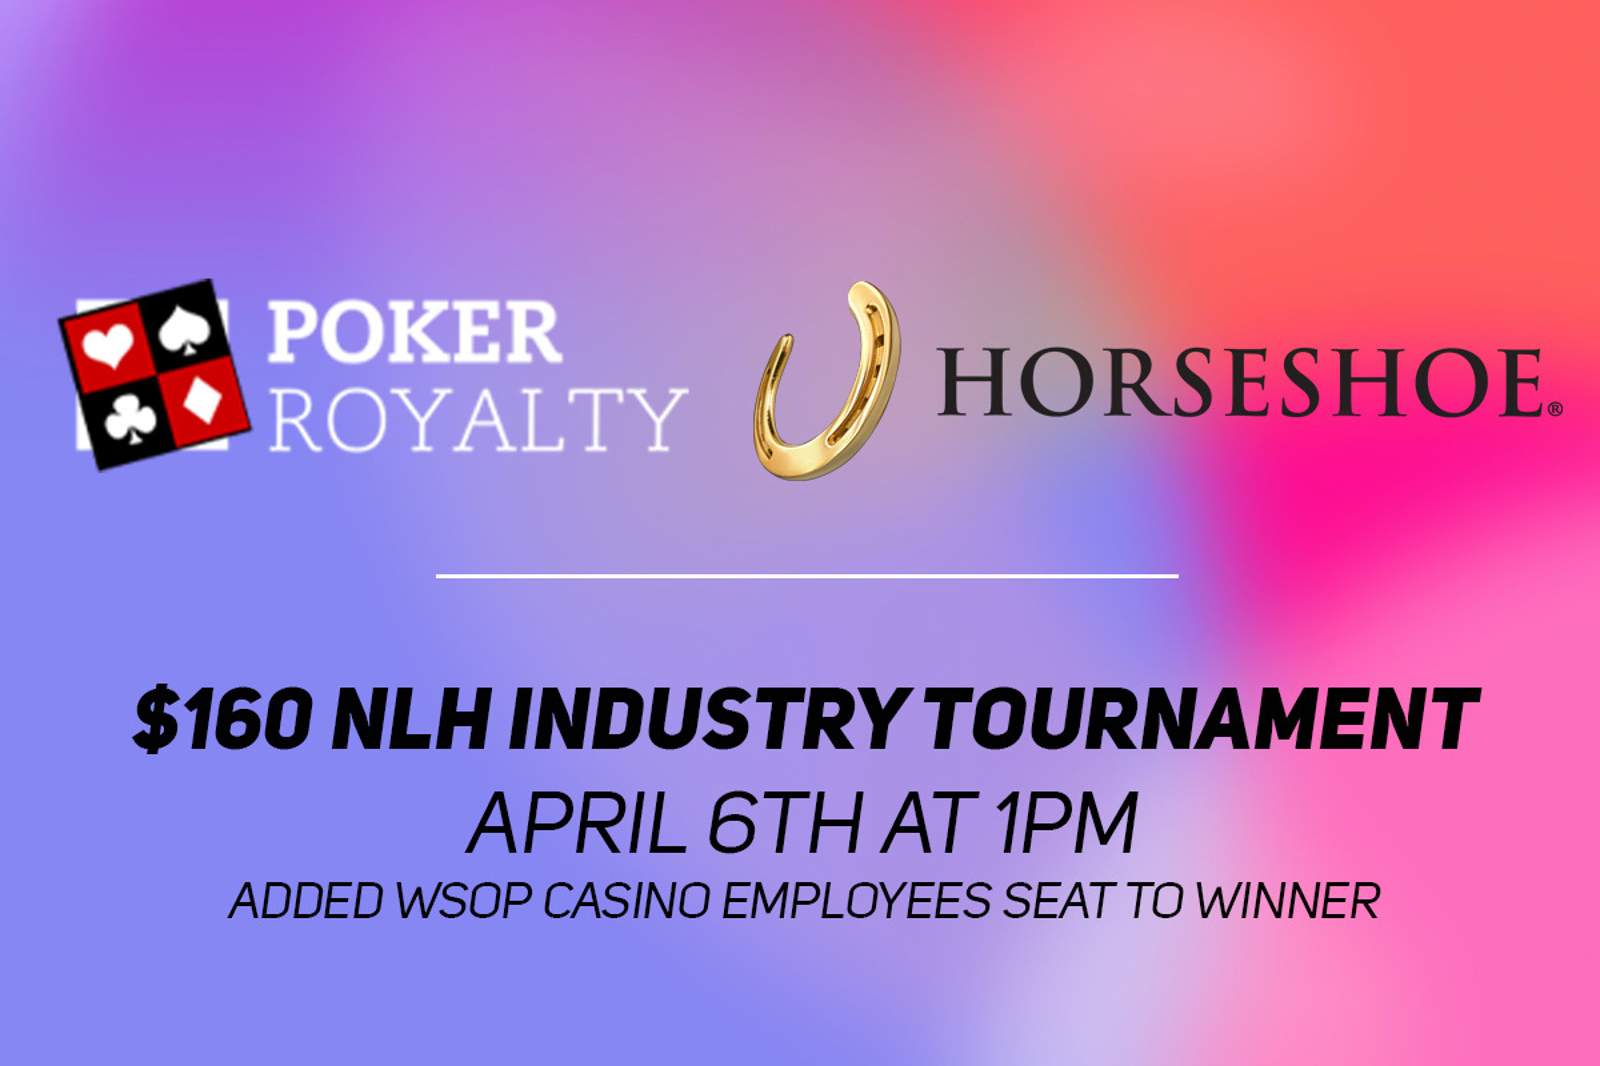 Poker Royalty Presents Monthly Industry Tournament: Horseshoe Vegas on April 6